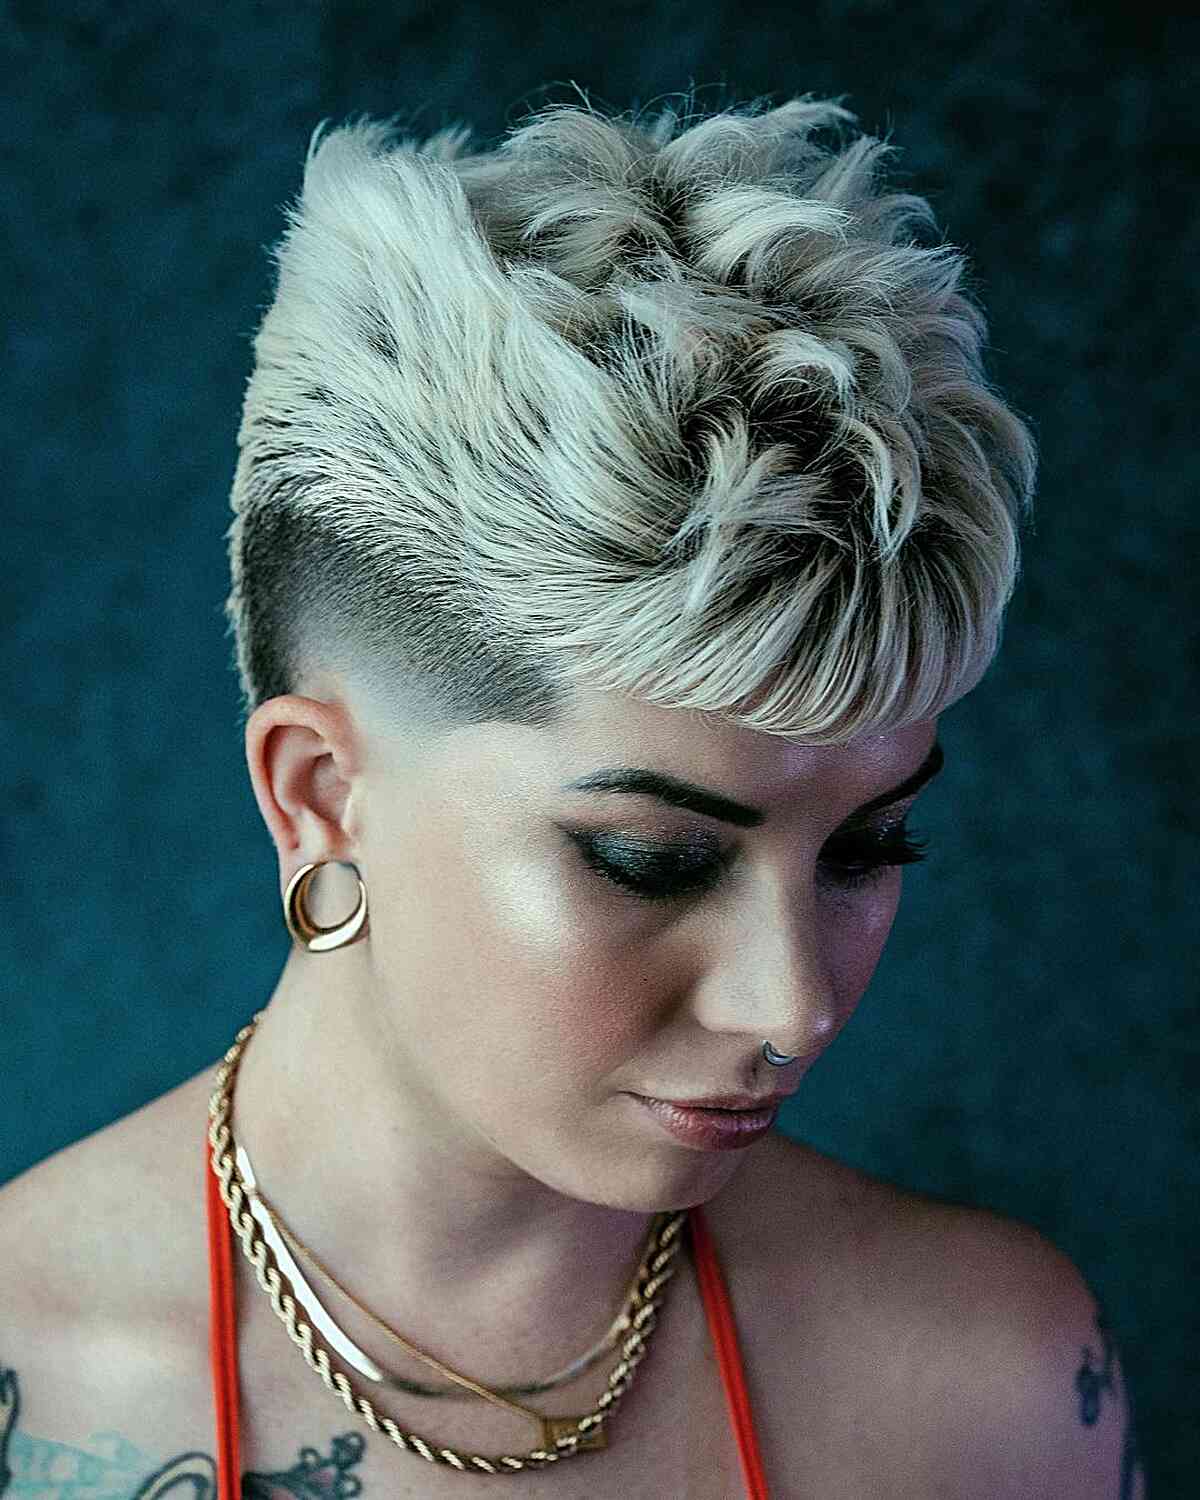 Edgy Platinum Messy Top with a Mid Fade for Older Women with textured hair